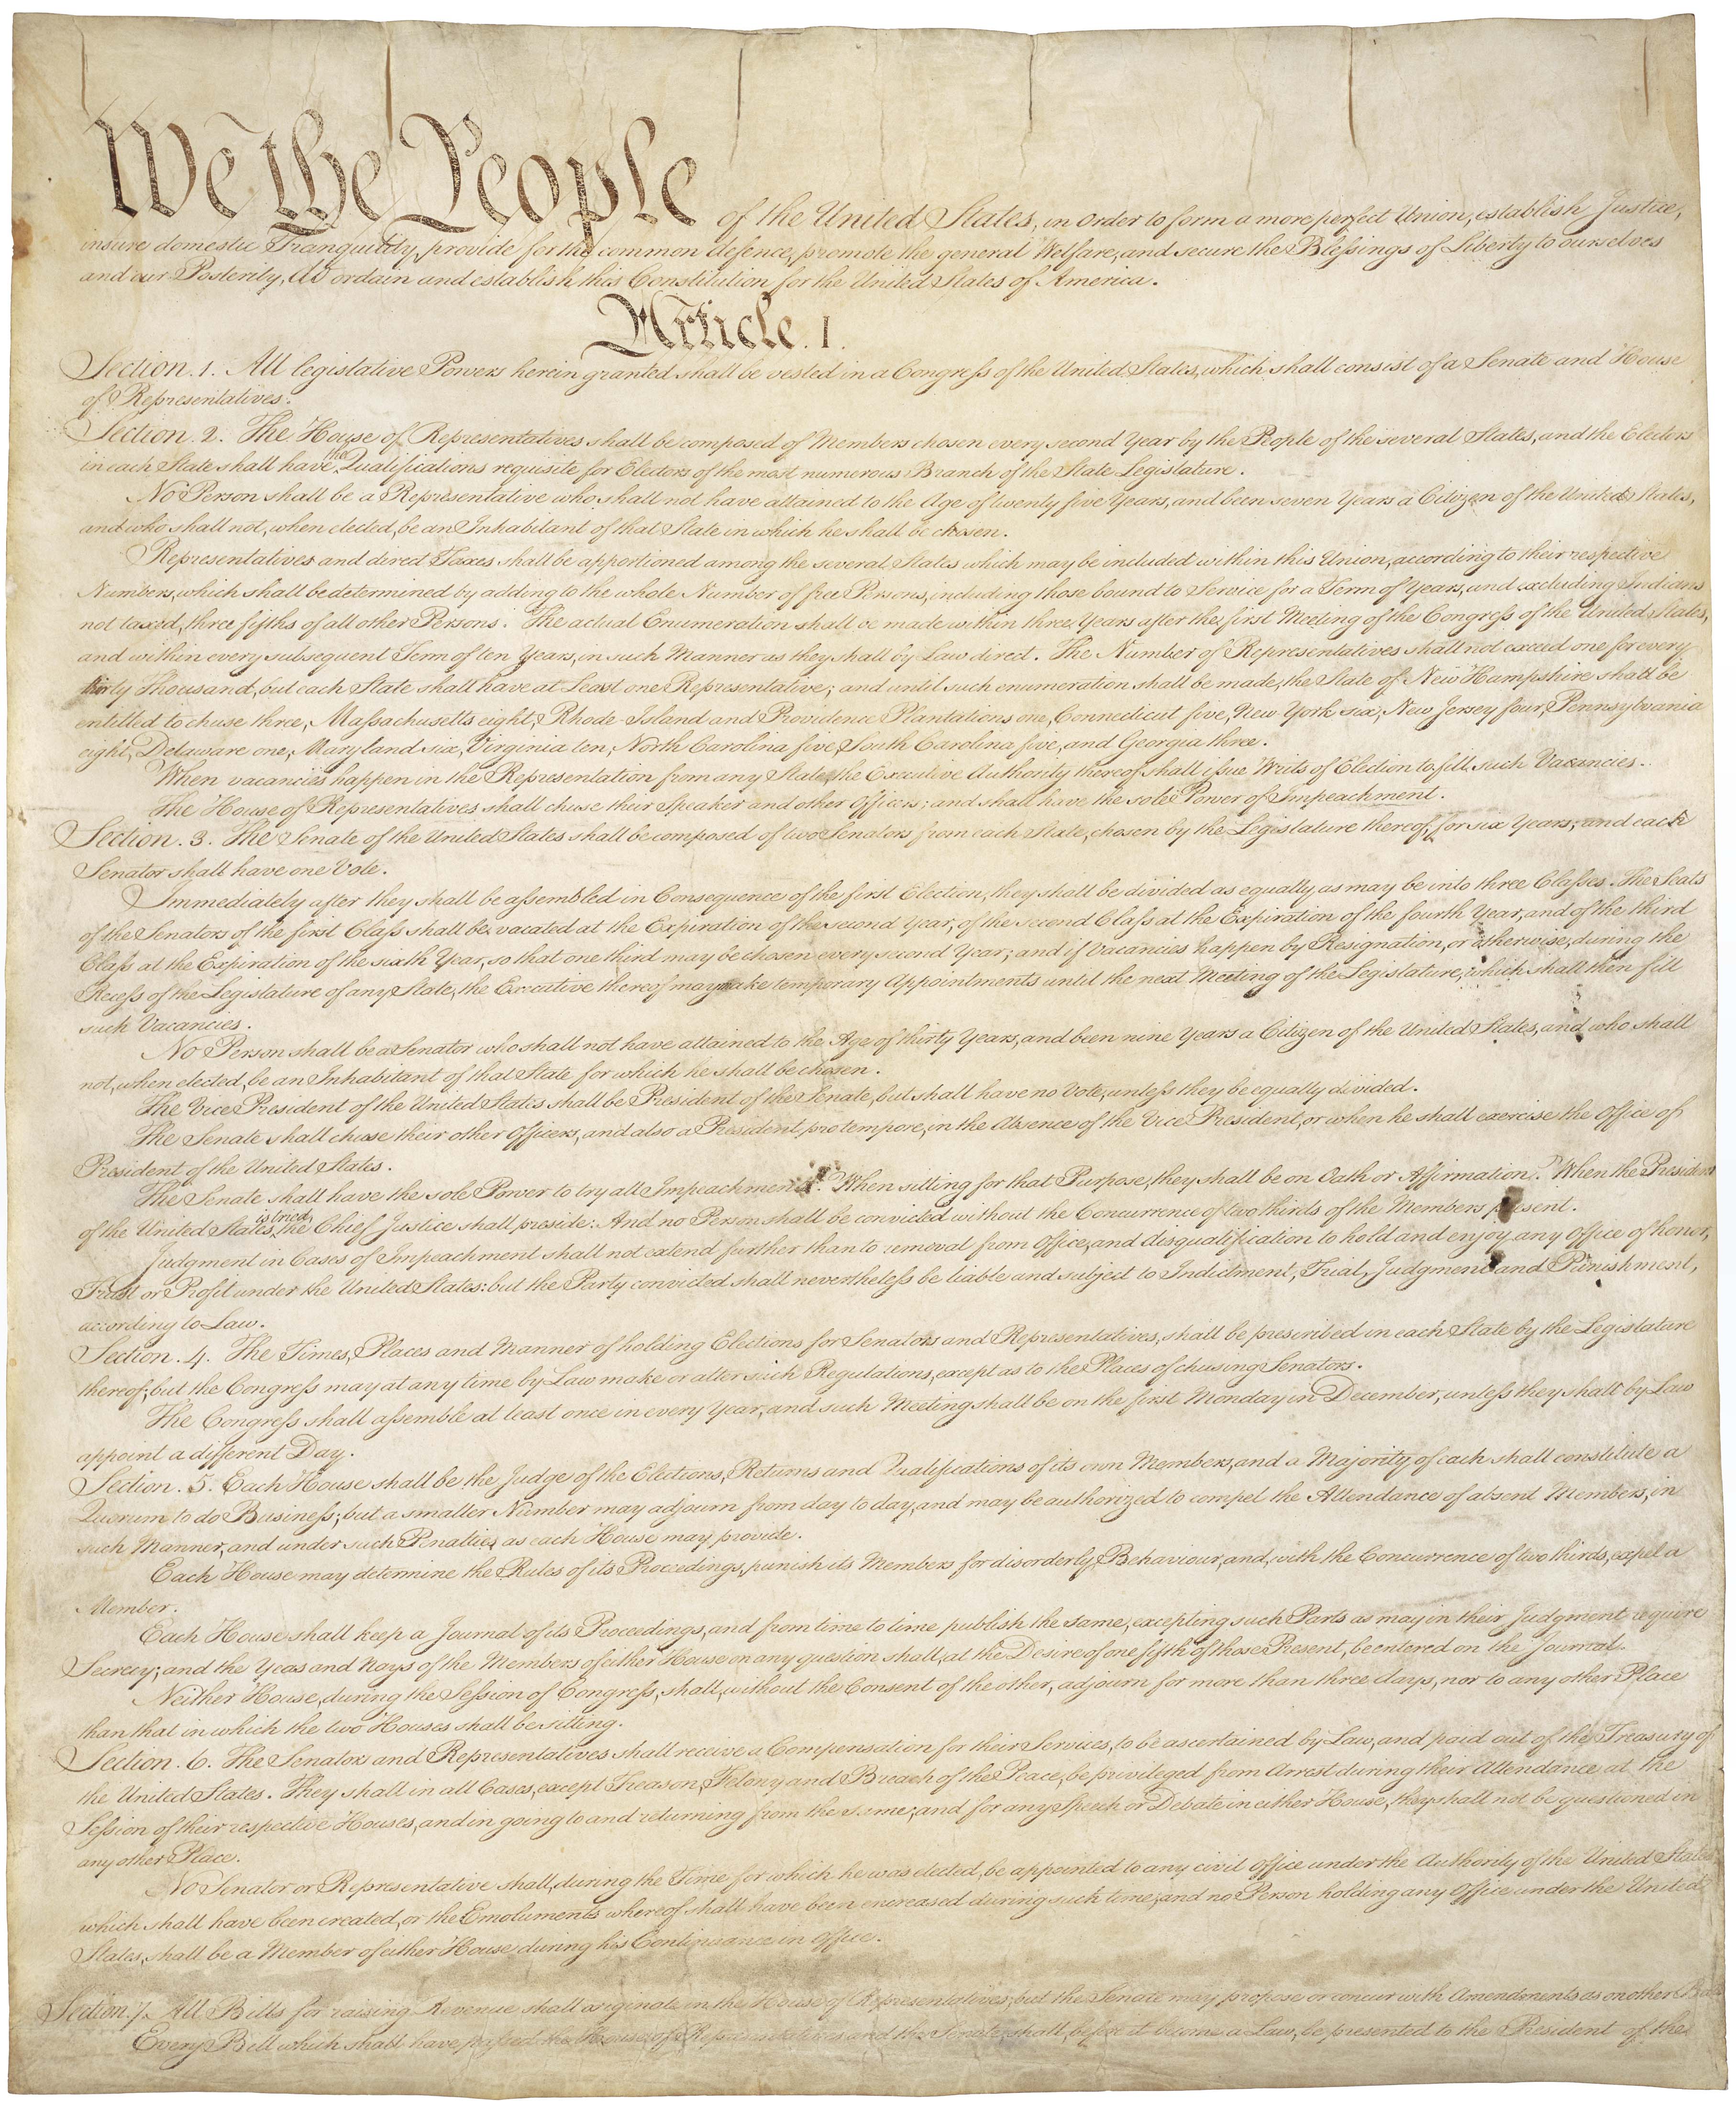 21 Things You May Not Know About the U.S. Constitution